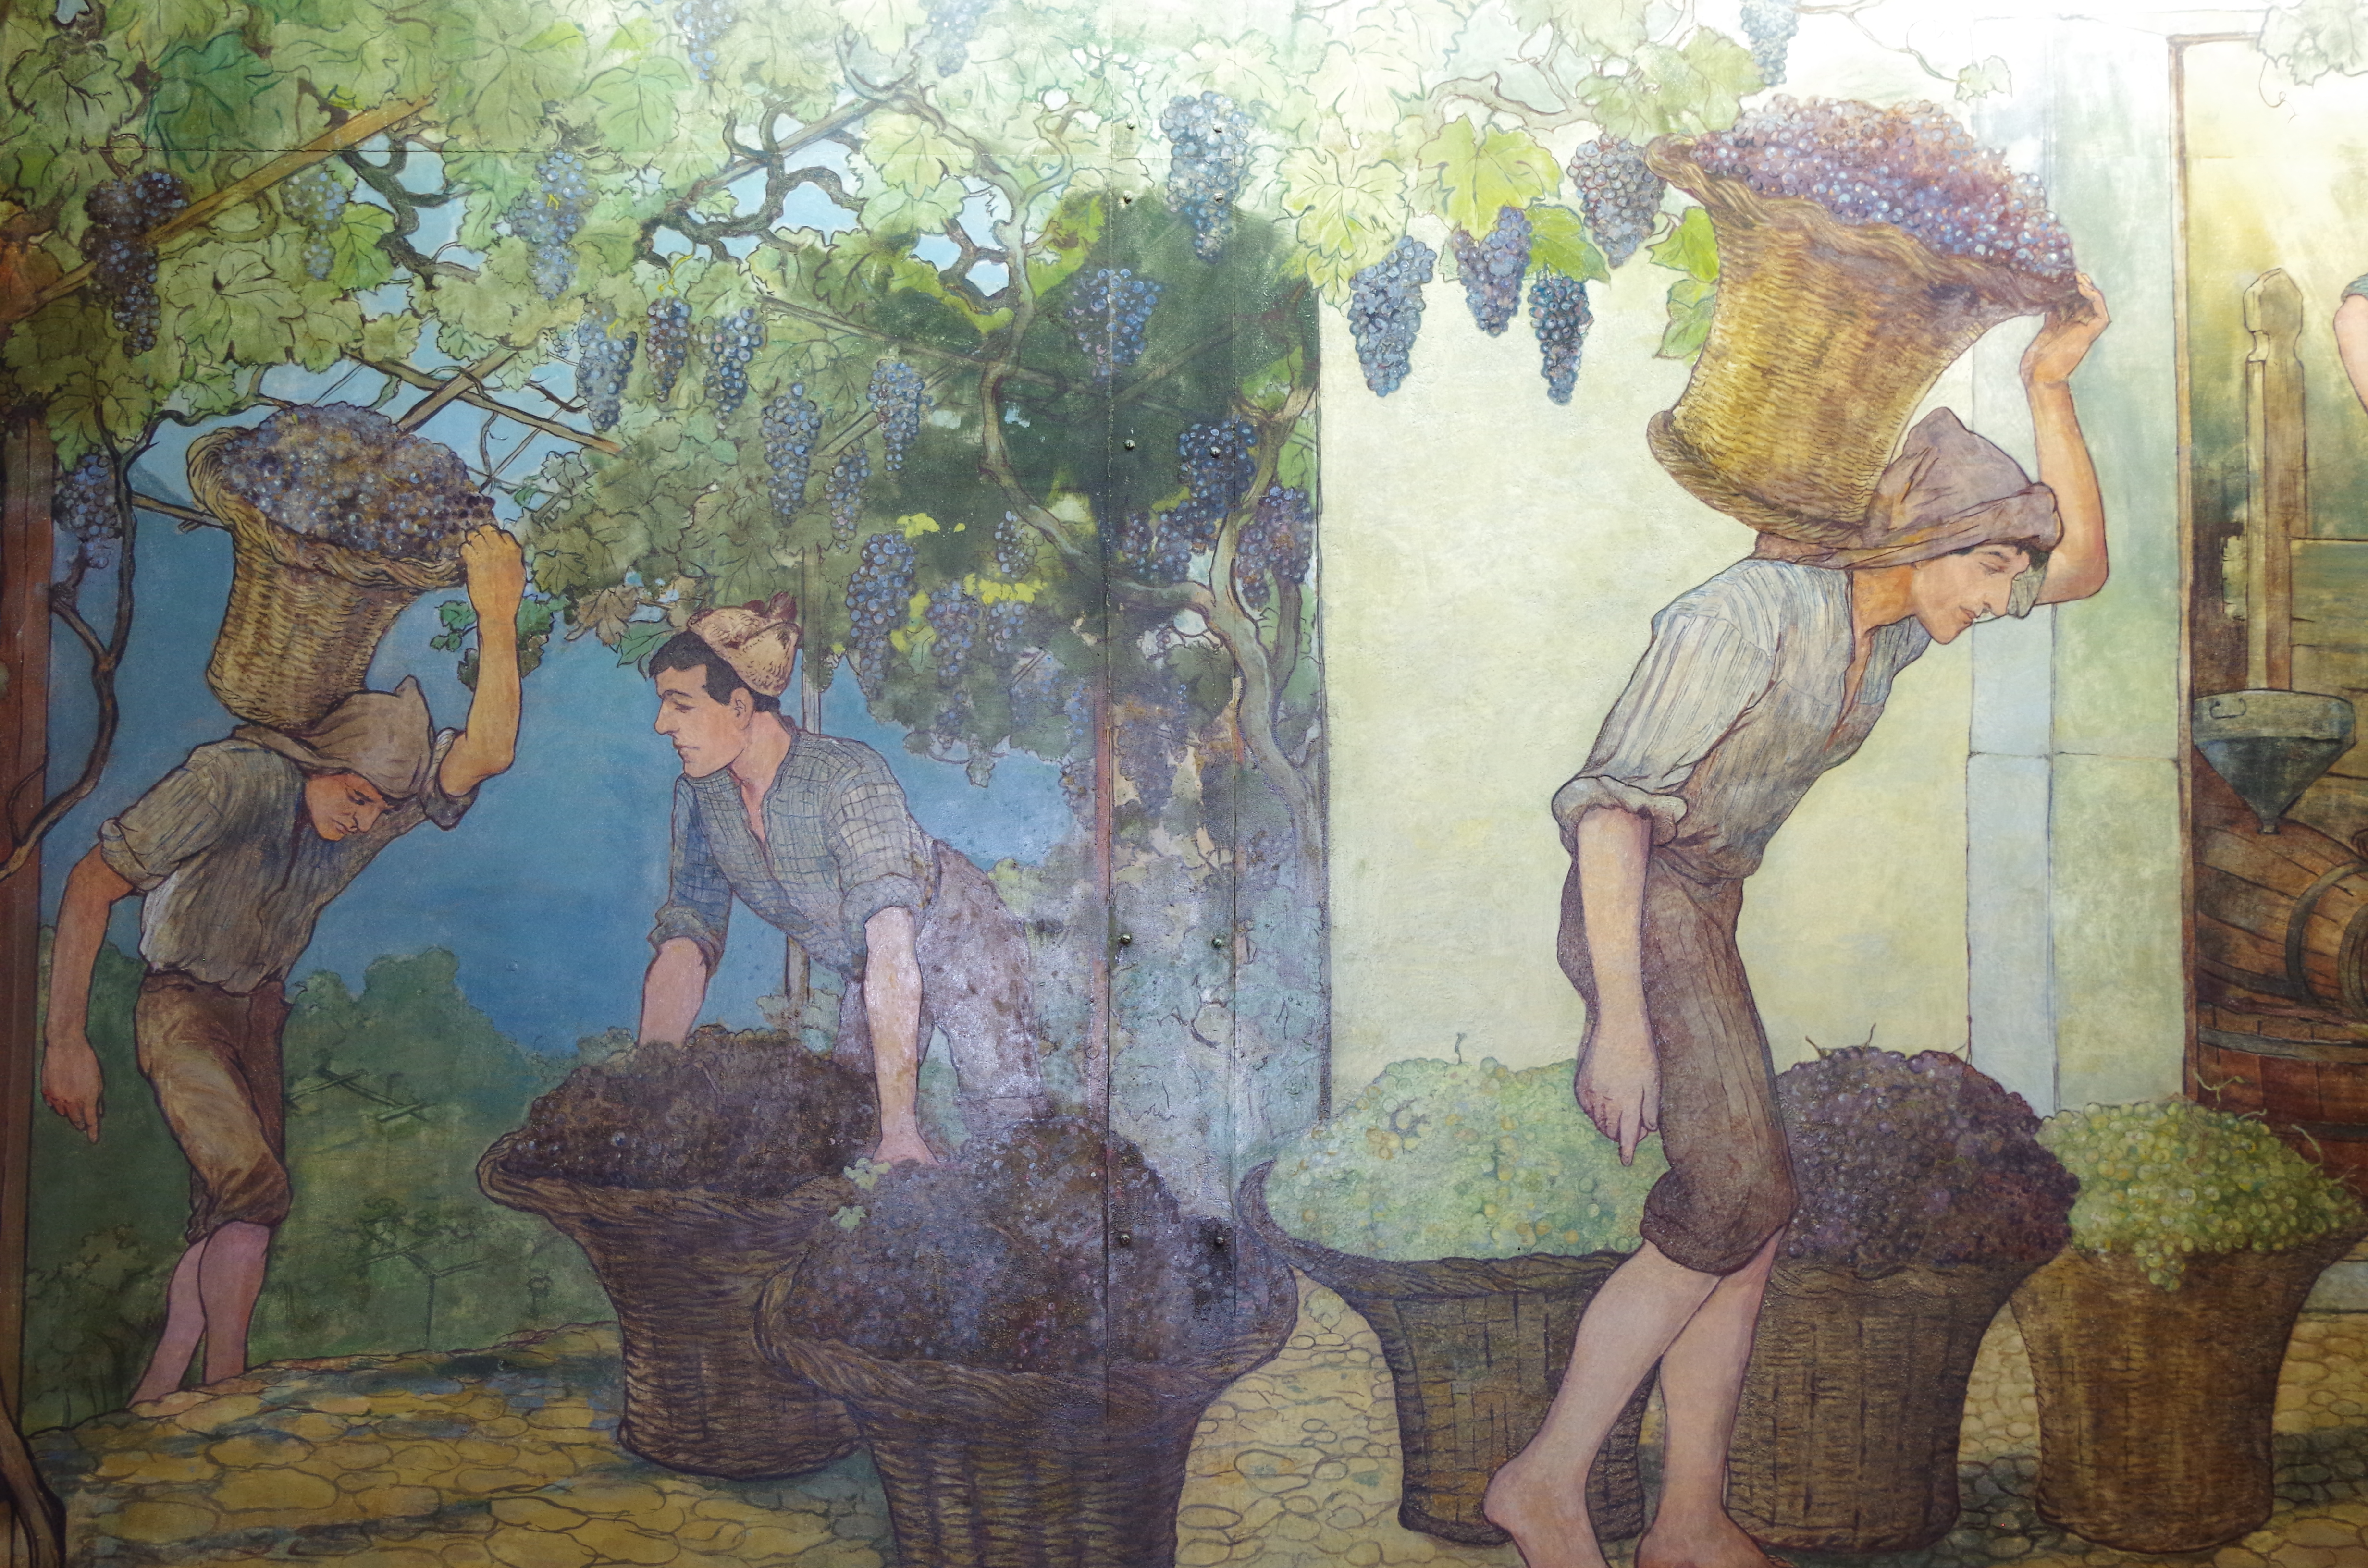 carrying grapes